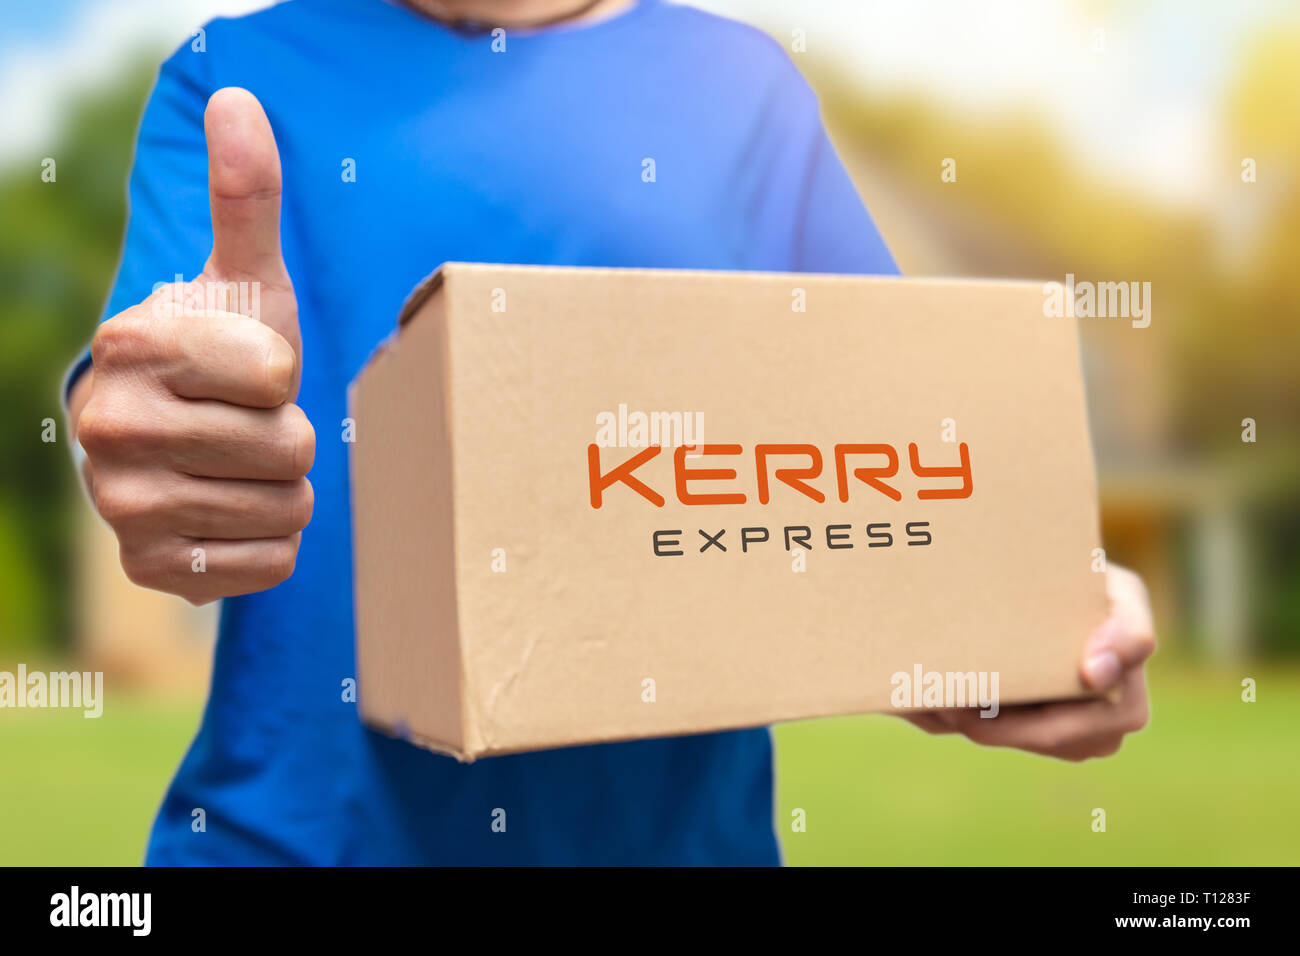 Kerry express Thailand parcel delivery services branch of Kerry Logistics Network Limited of Hongkong. 21 March 2019, Bangkok, Thailand. Stock Photo